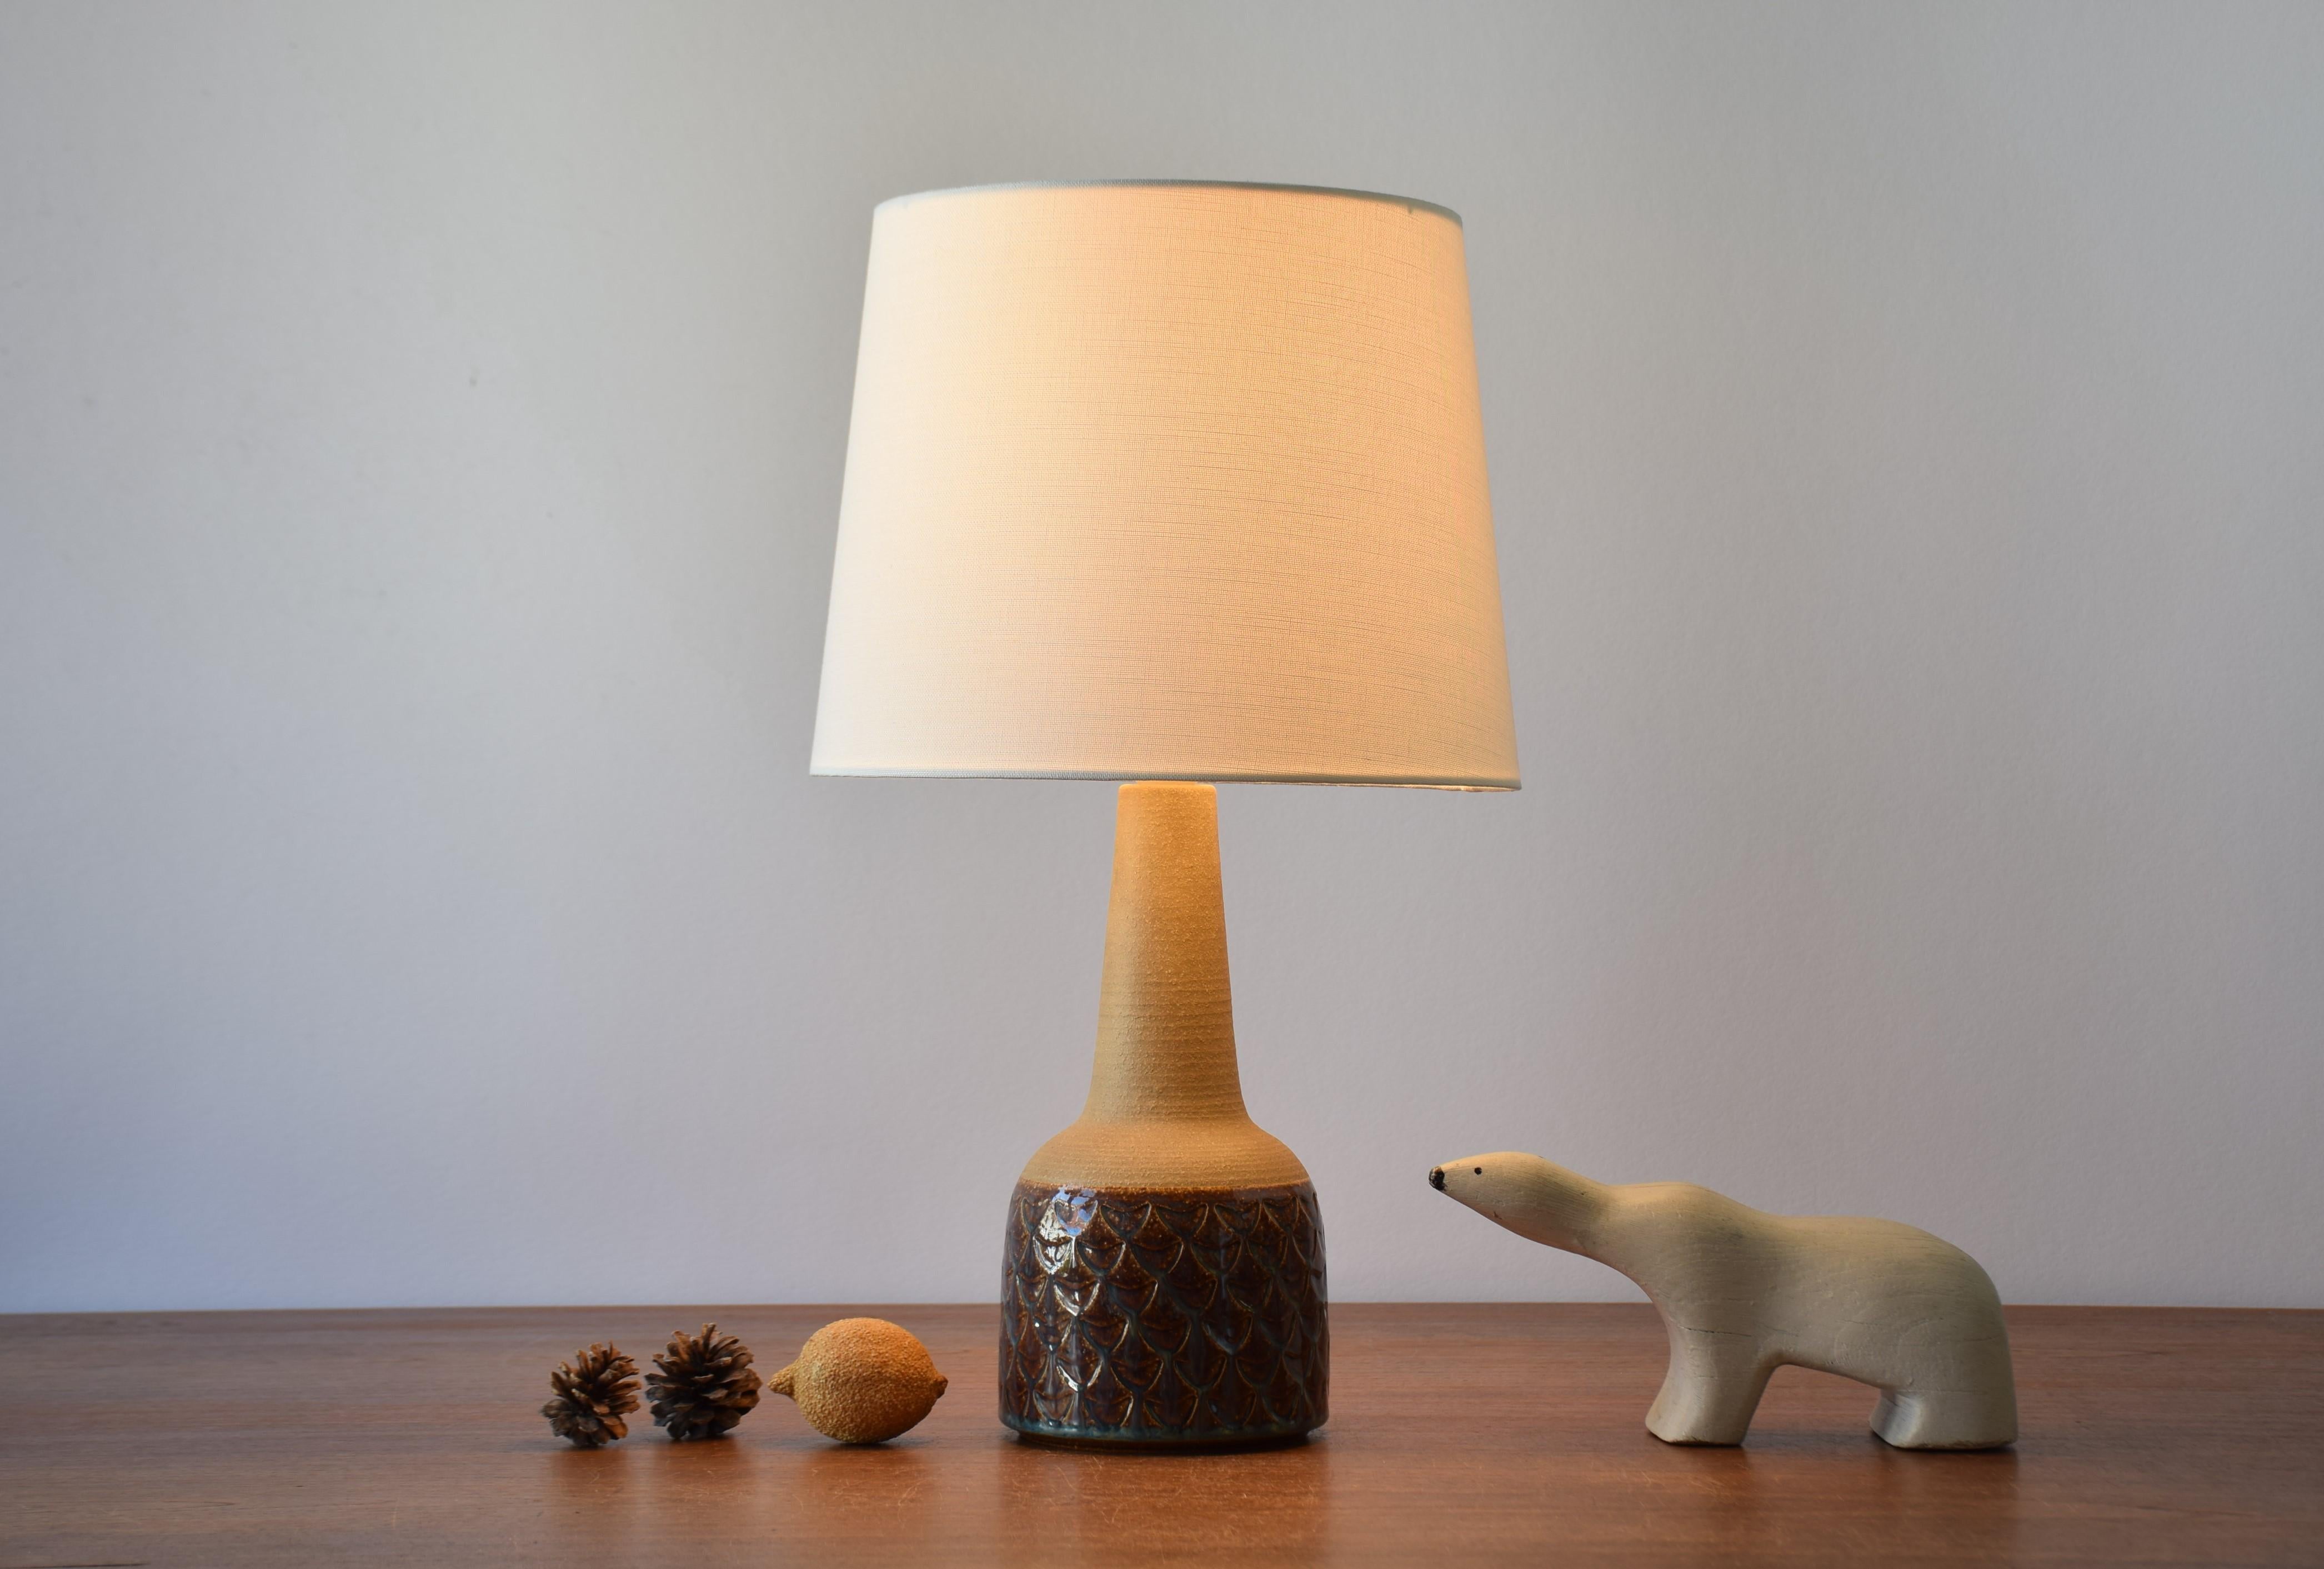 Table lamp by Einar Johansen for Søholm Stentøj, Denmark, circa 1960s.
The neck is unglazed and shows the warm sand colored glaze. The body is decorated with an embossed fish scales covered by shiny glaze in brown with blue elements.

Included is